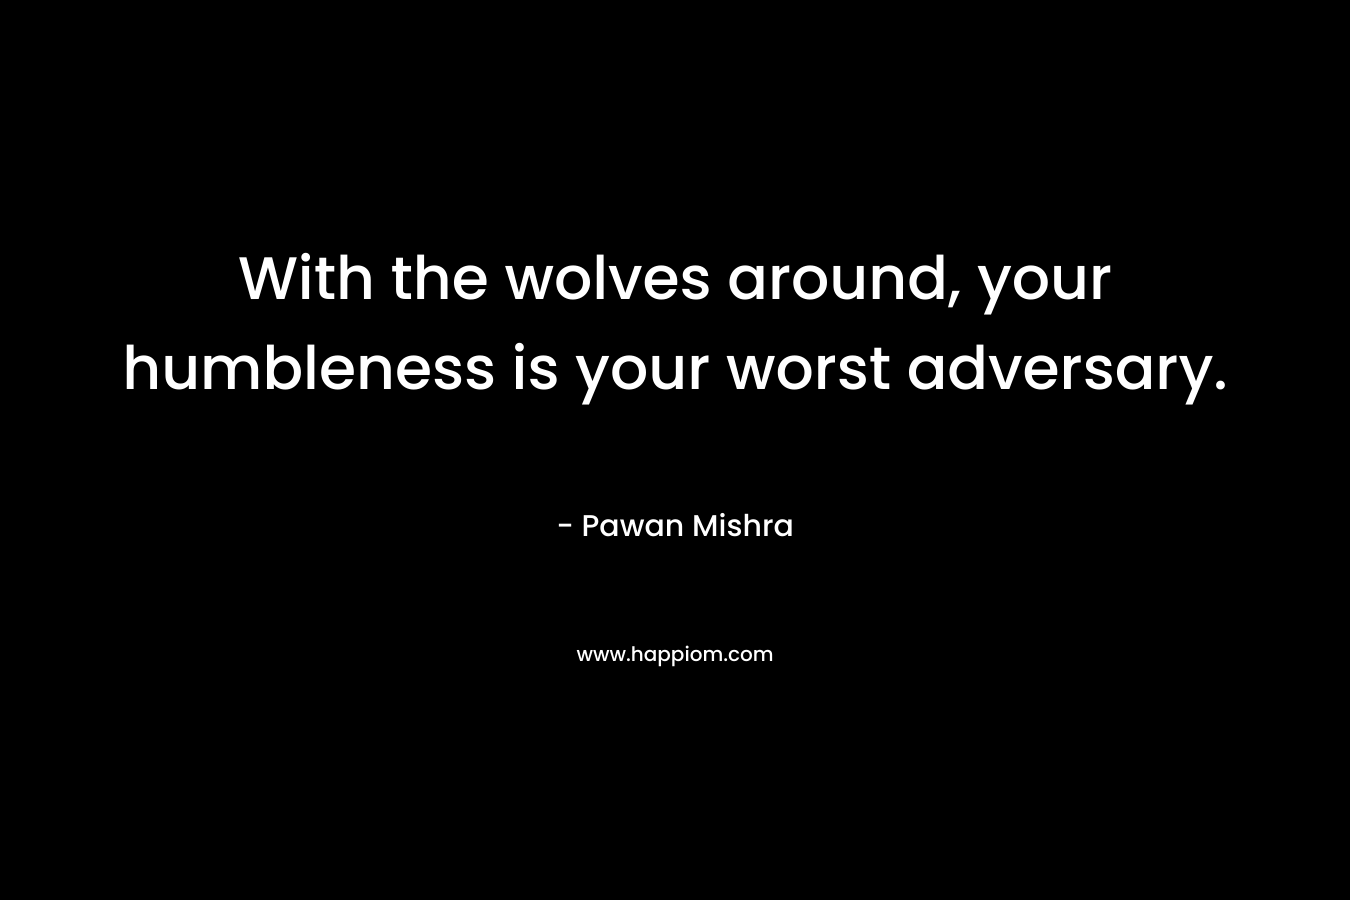 With the wolves around, your humbleness is your worst adversary. – Pawan Mishra